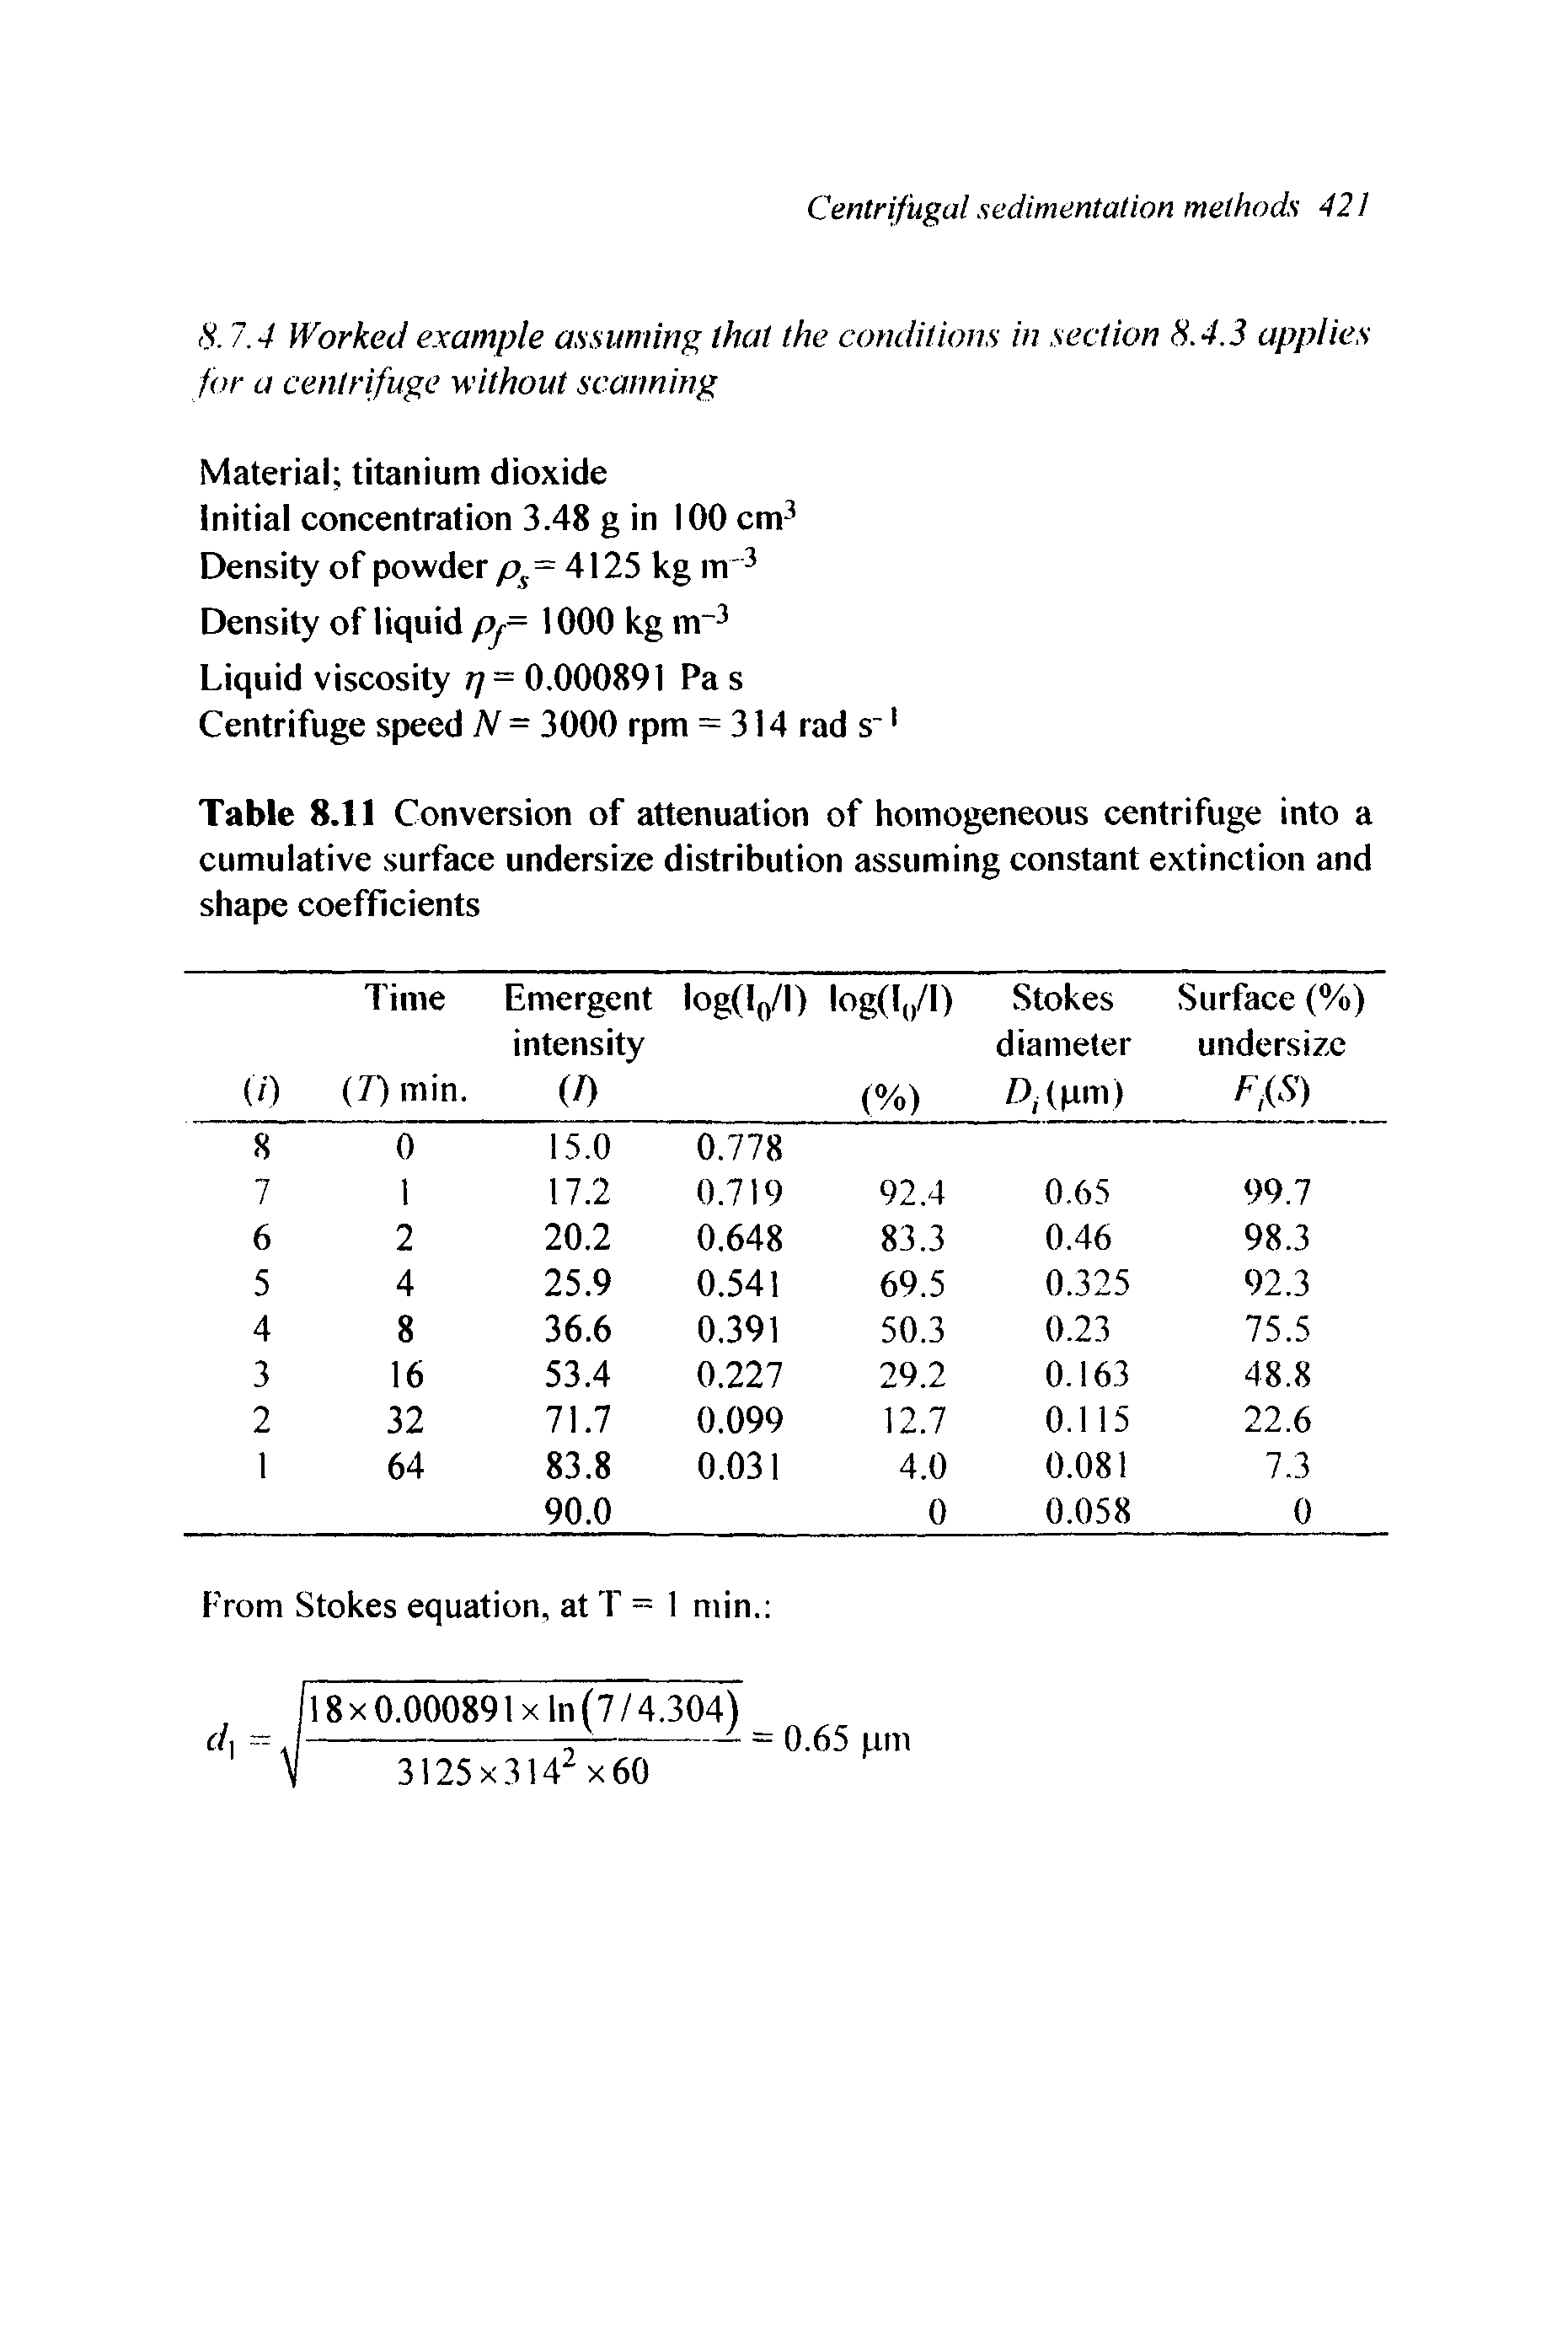 Table 8.11 Conversion of attenuation of homogeneous centrifuge into a cumulative surface undersize distribution assuming constant extinction and shape coefficients...